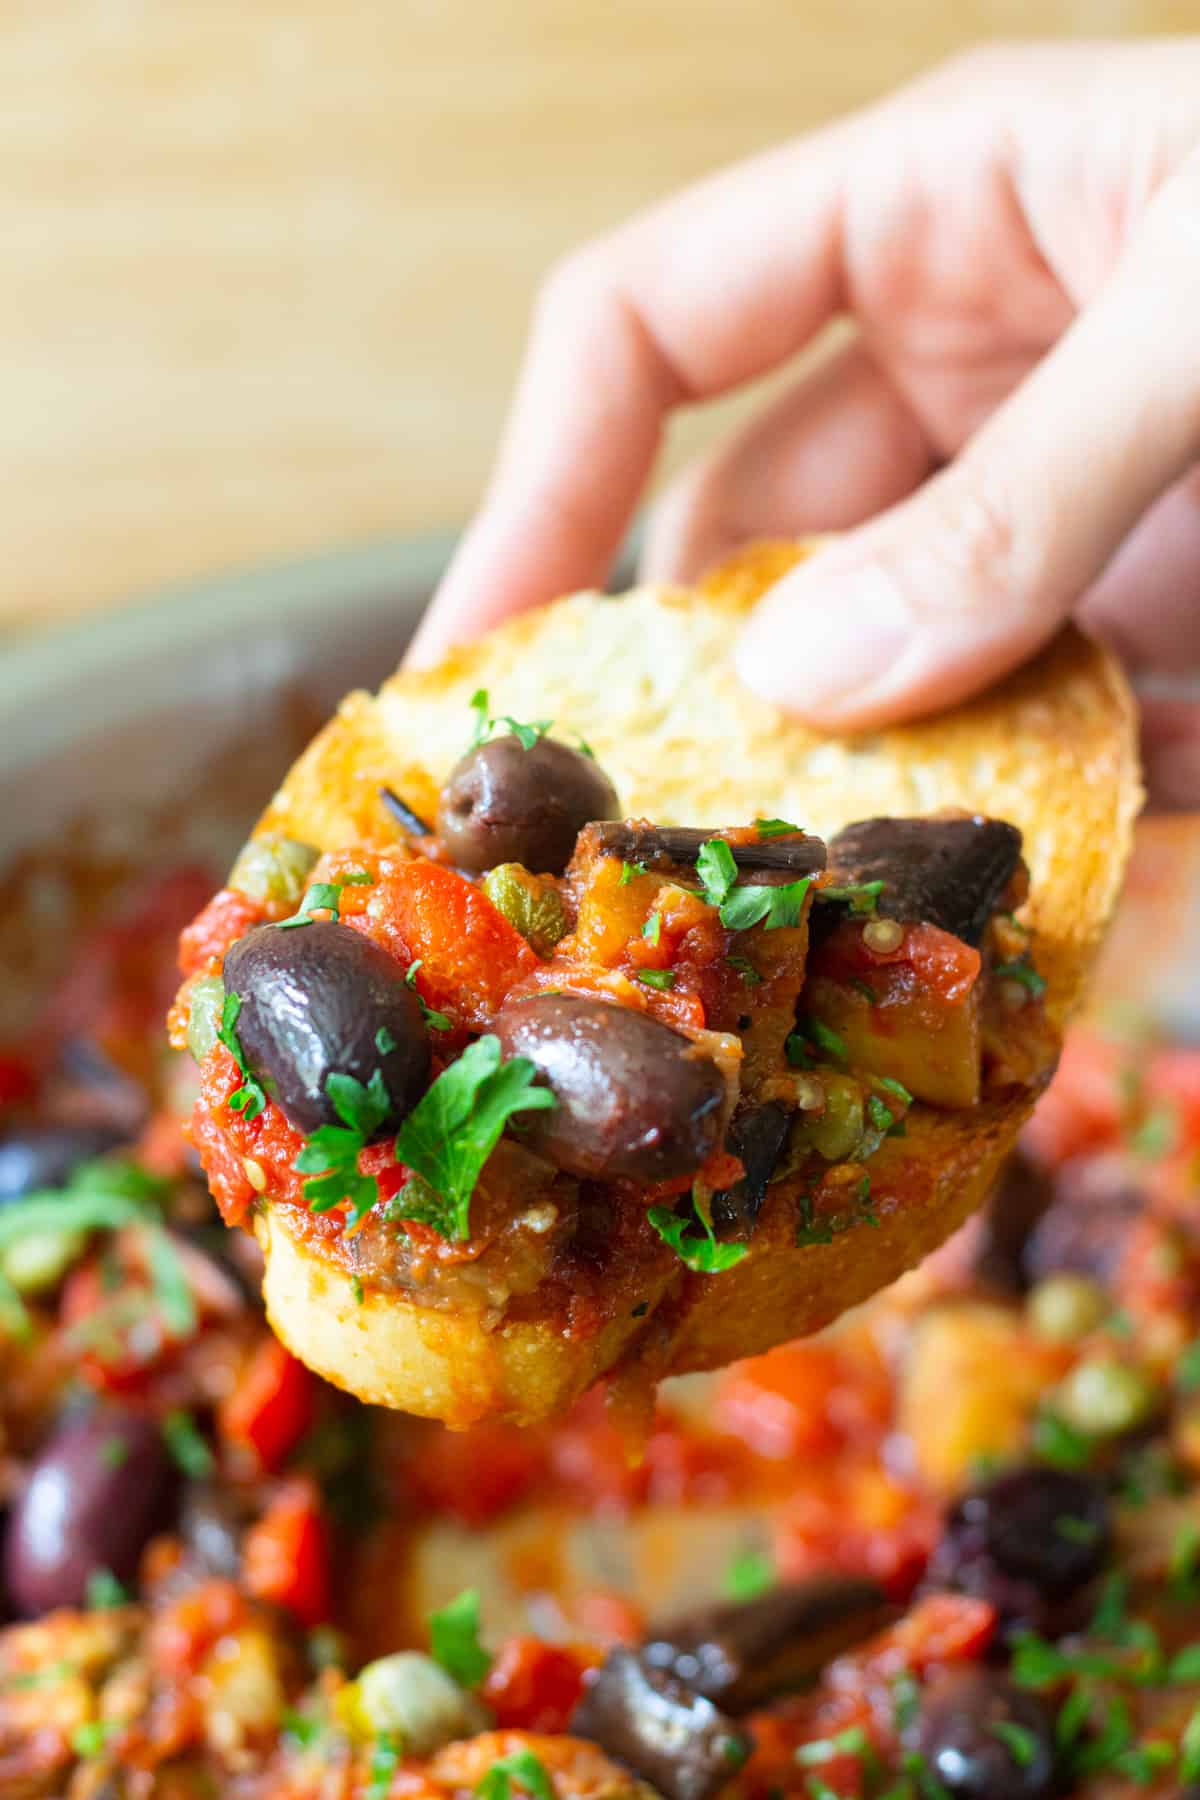 You can serve eggplant caponata as a main dish with some crusty bread.